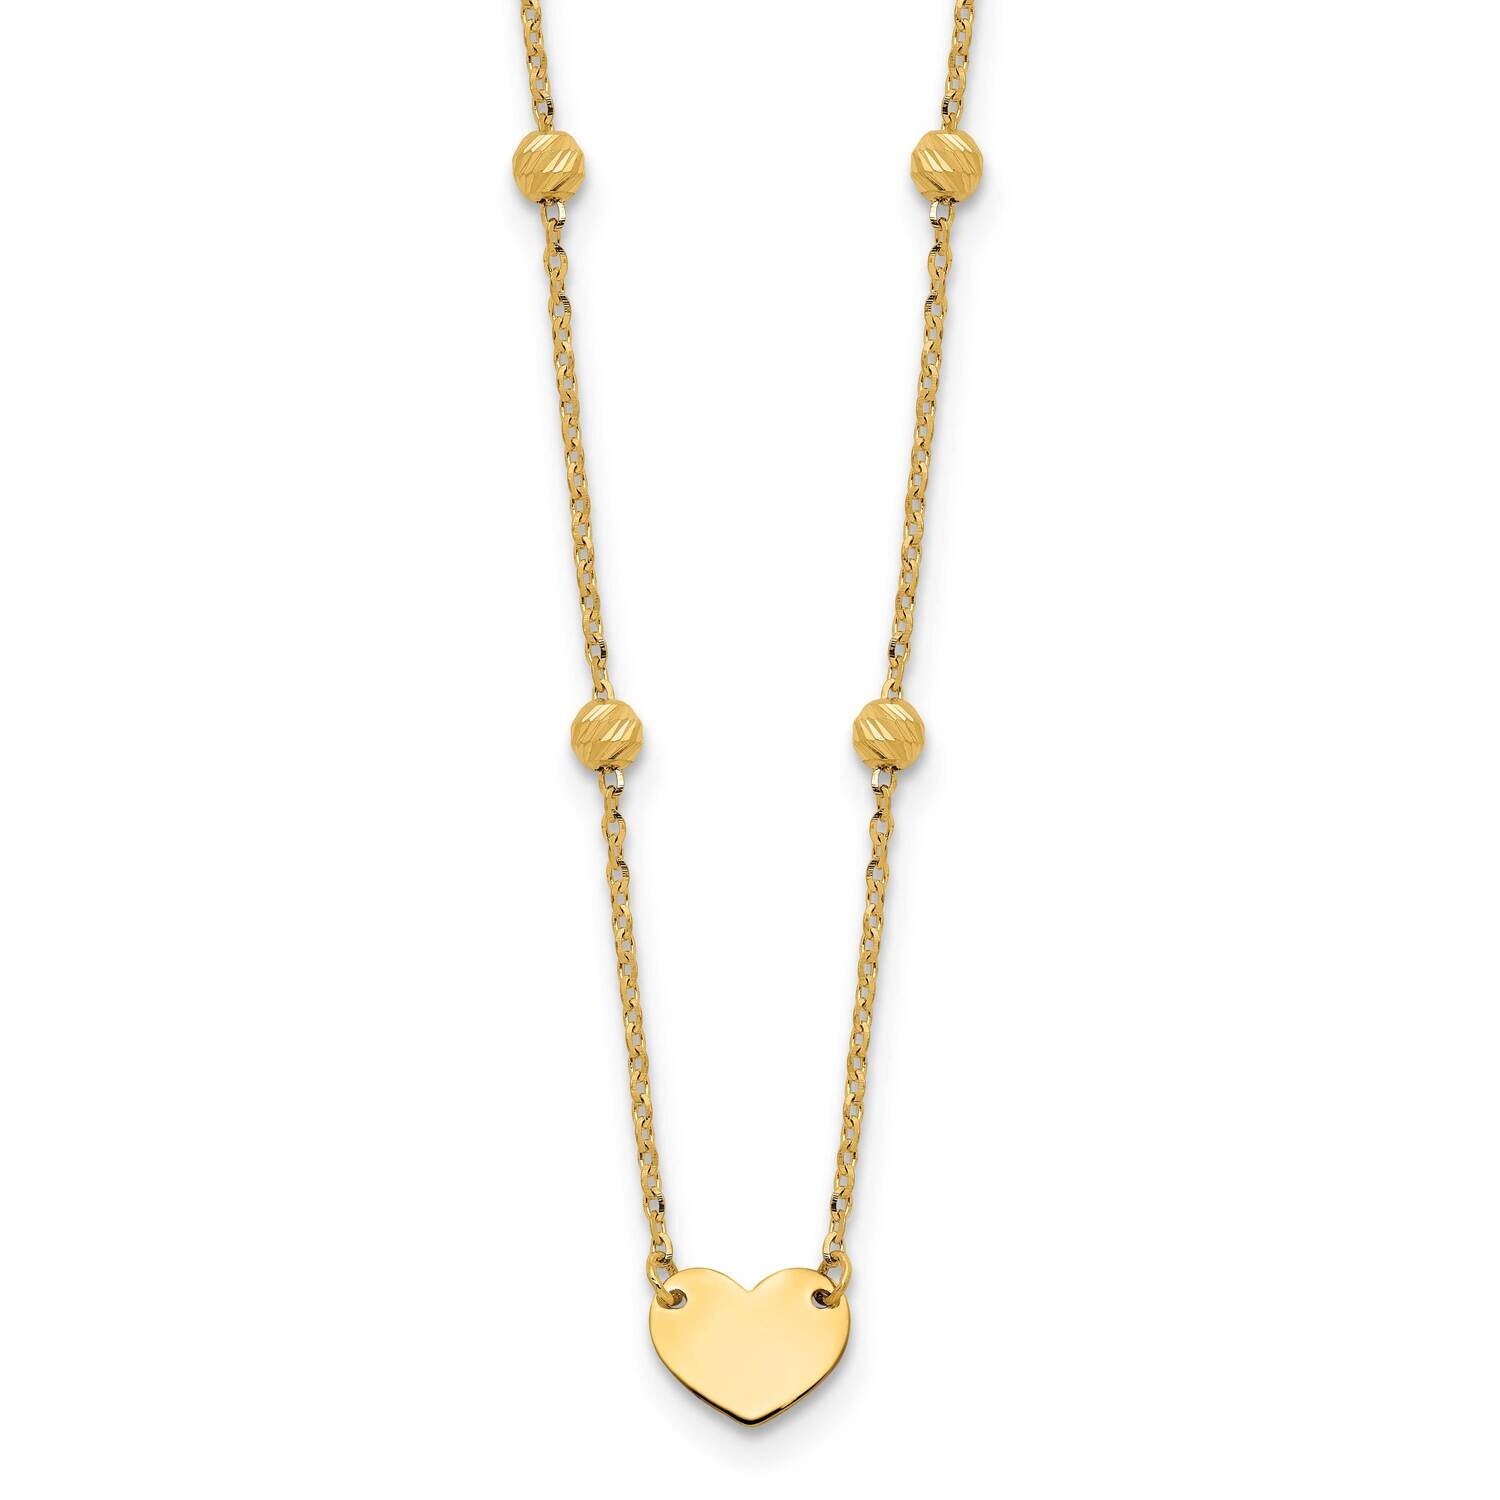 Diamond-Cut Heart Beads Plus 2 Inch Extender Necklace 14k Polished Gold SF3039-15.5